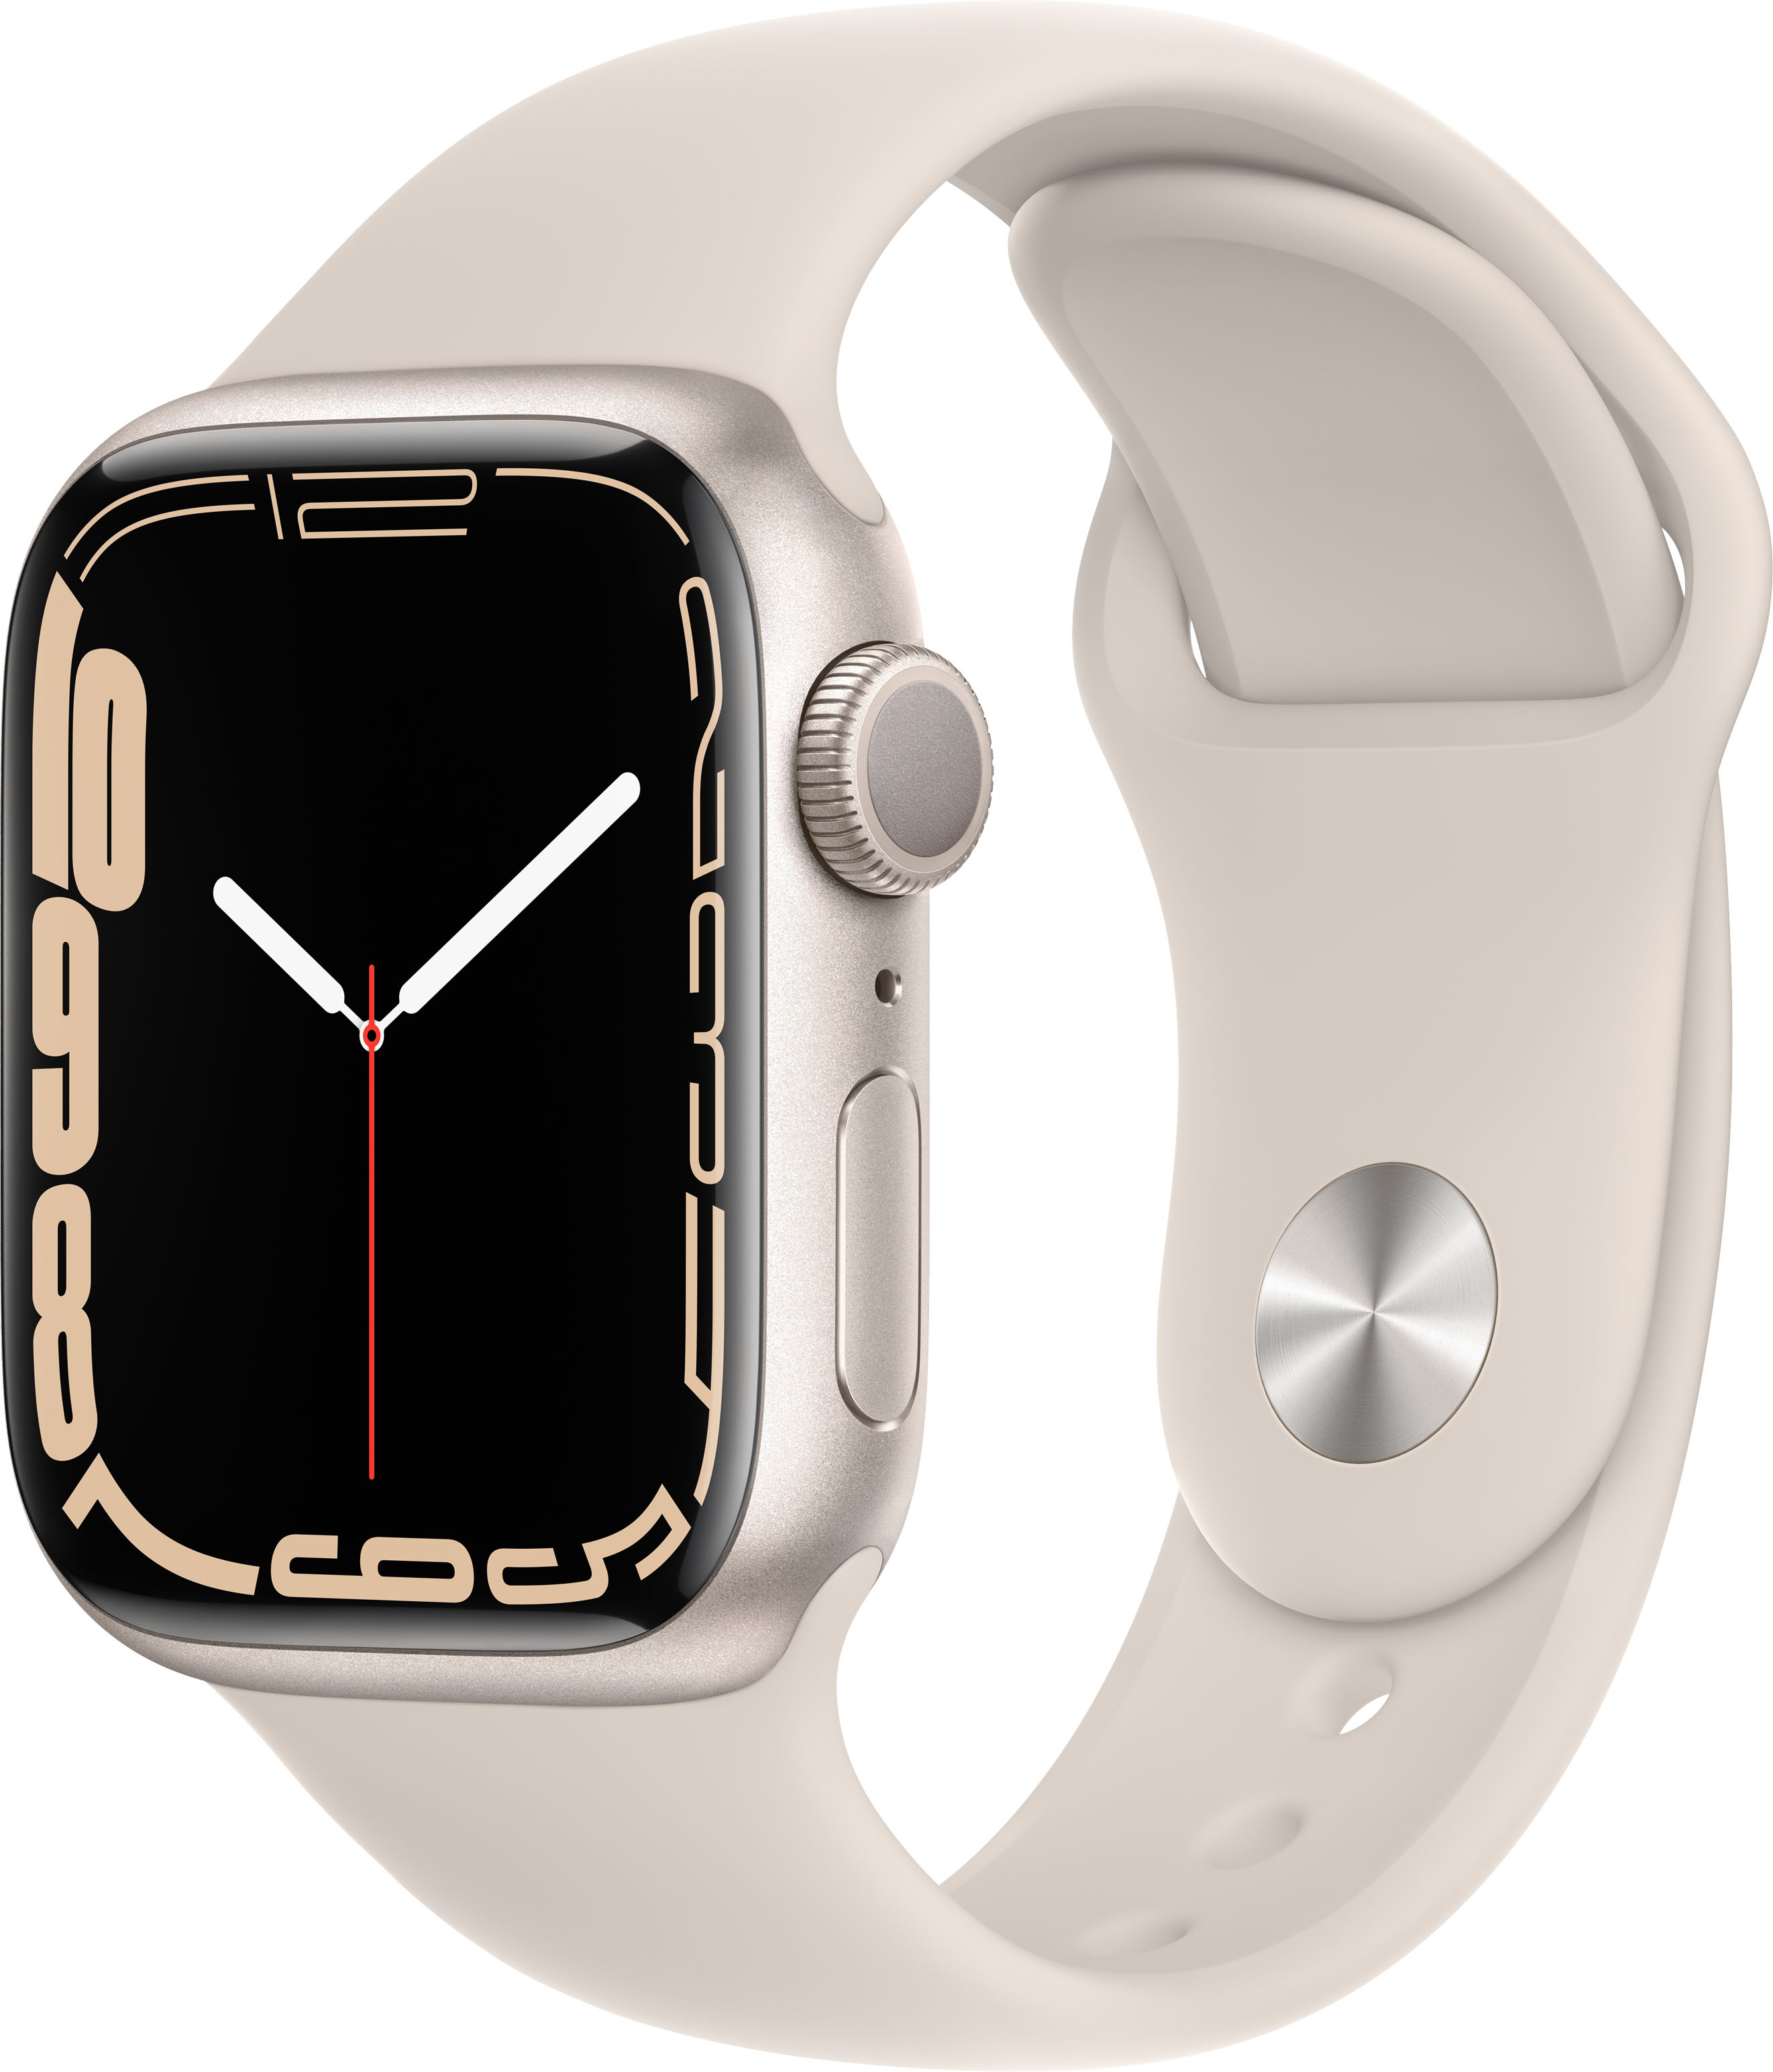 Apple Watch Series 7 (Best Buy Credit Cards only) - YMMV - $289